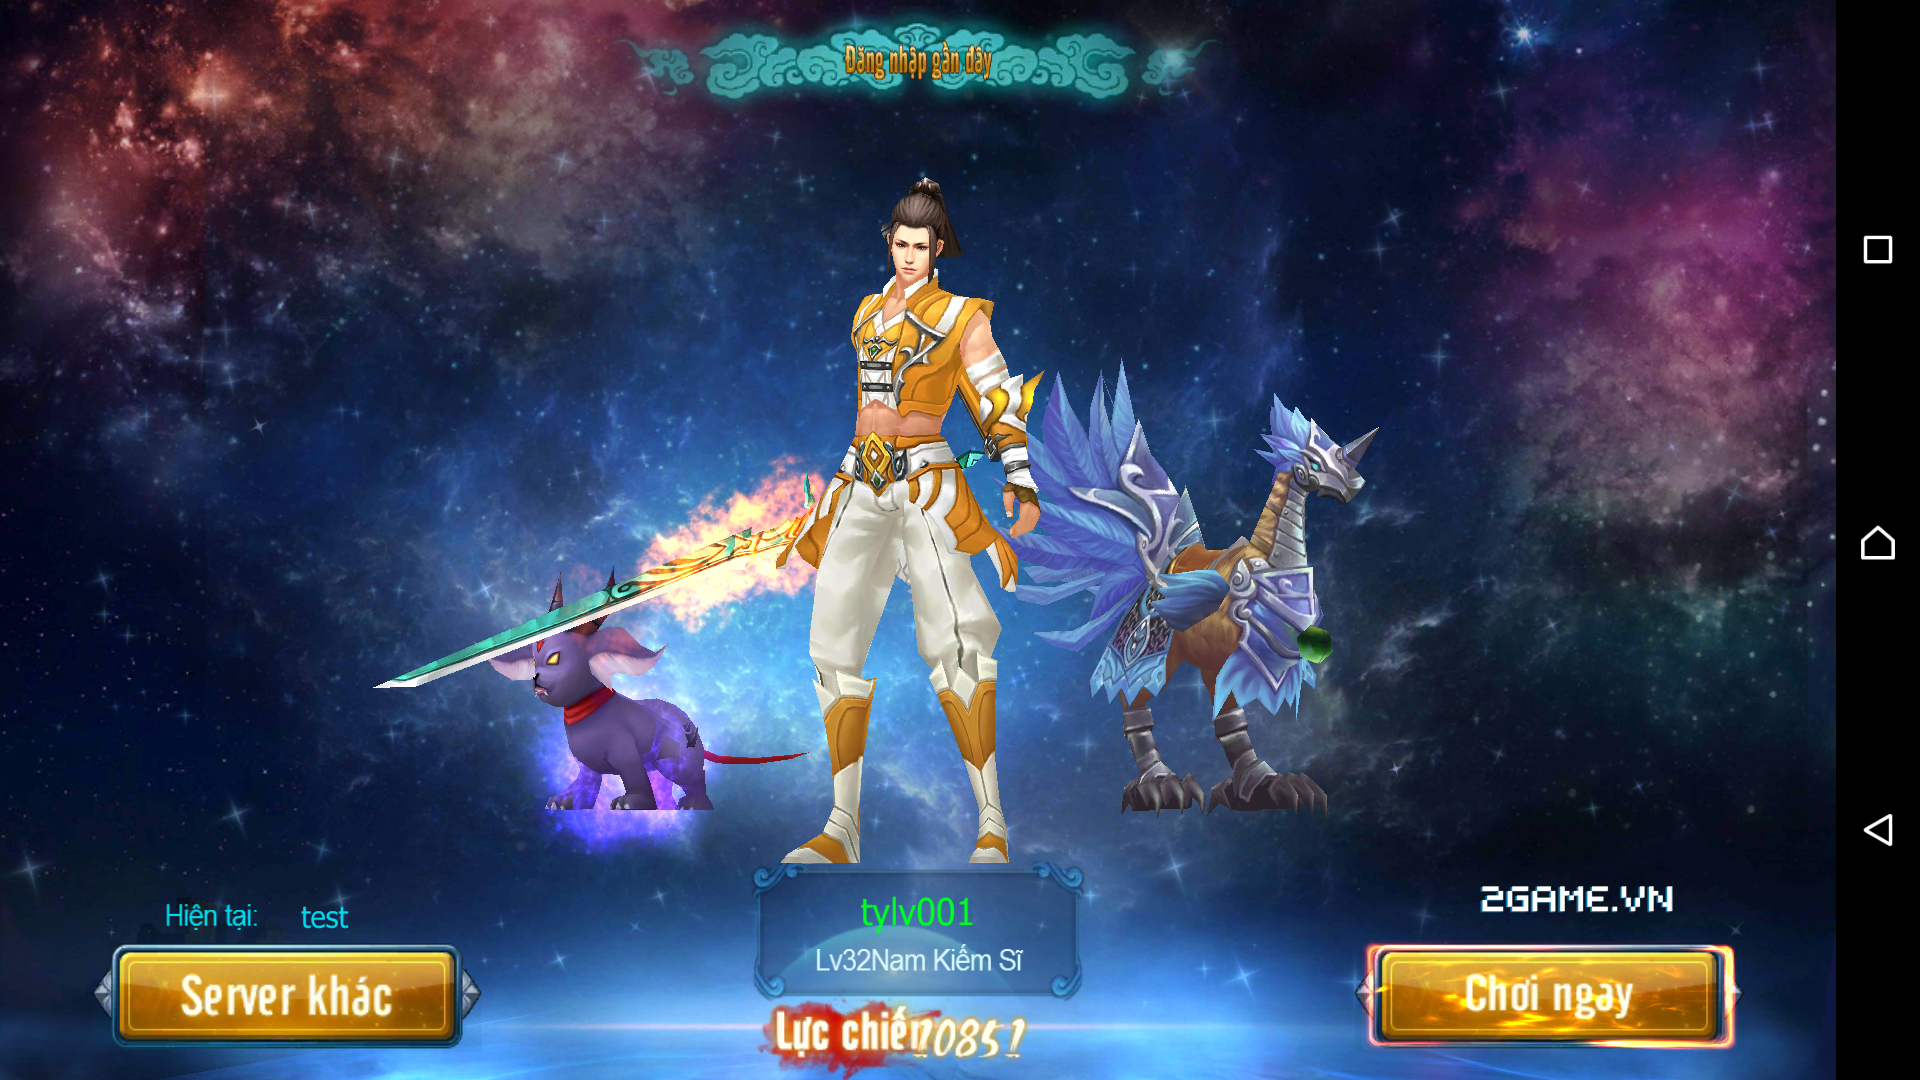 https://s3.cloud.cmctelecom.vn/2game-vn/pictures/images/2015/10/26/2game-trai-nghiem-ban-long-3d-mobile-7.jpg